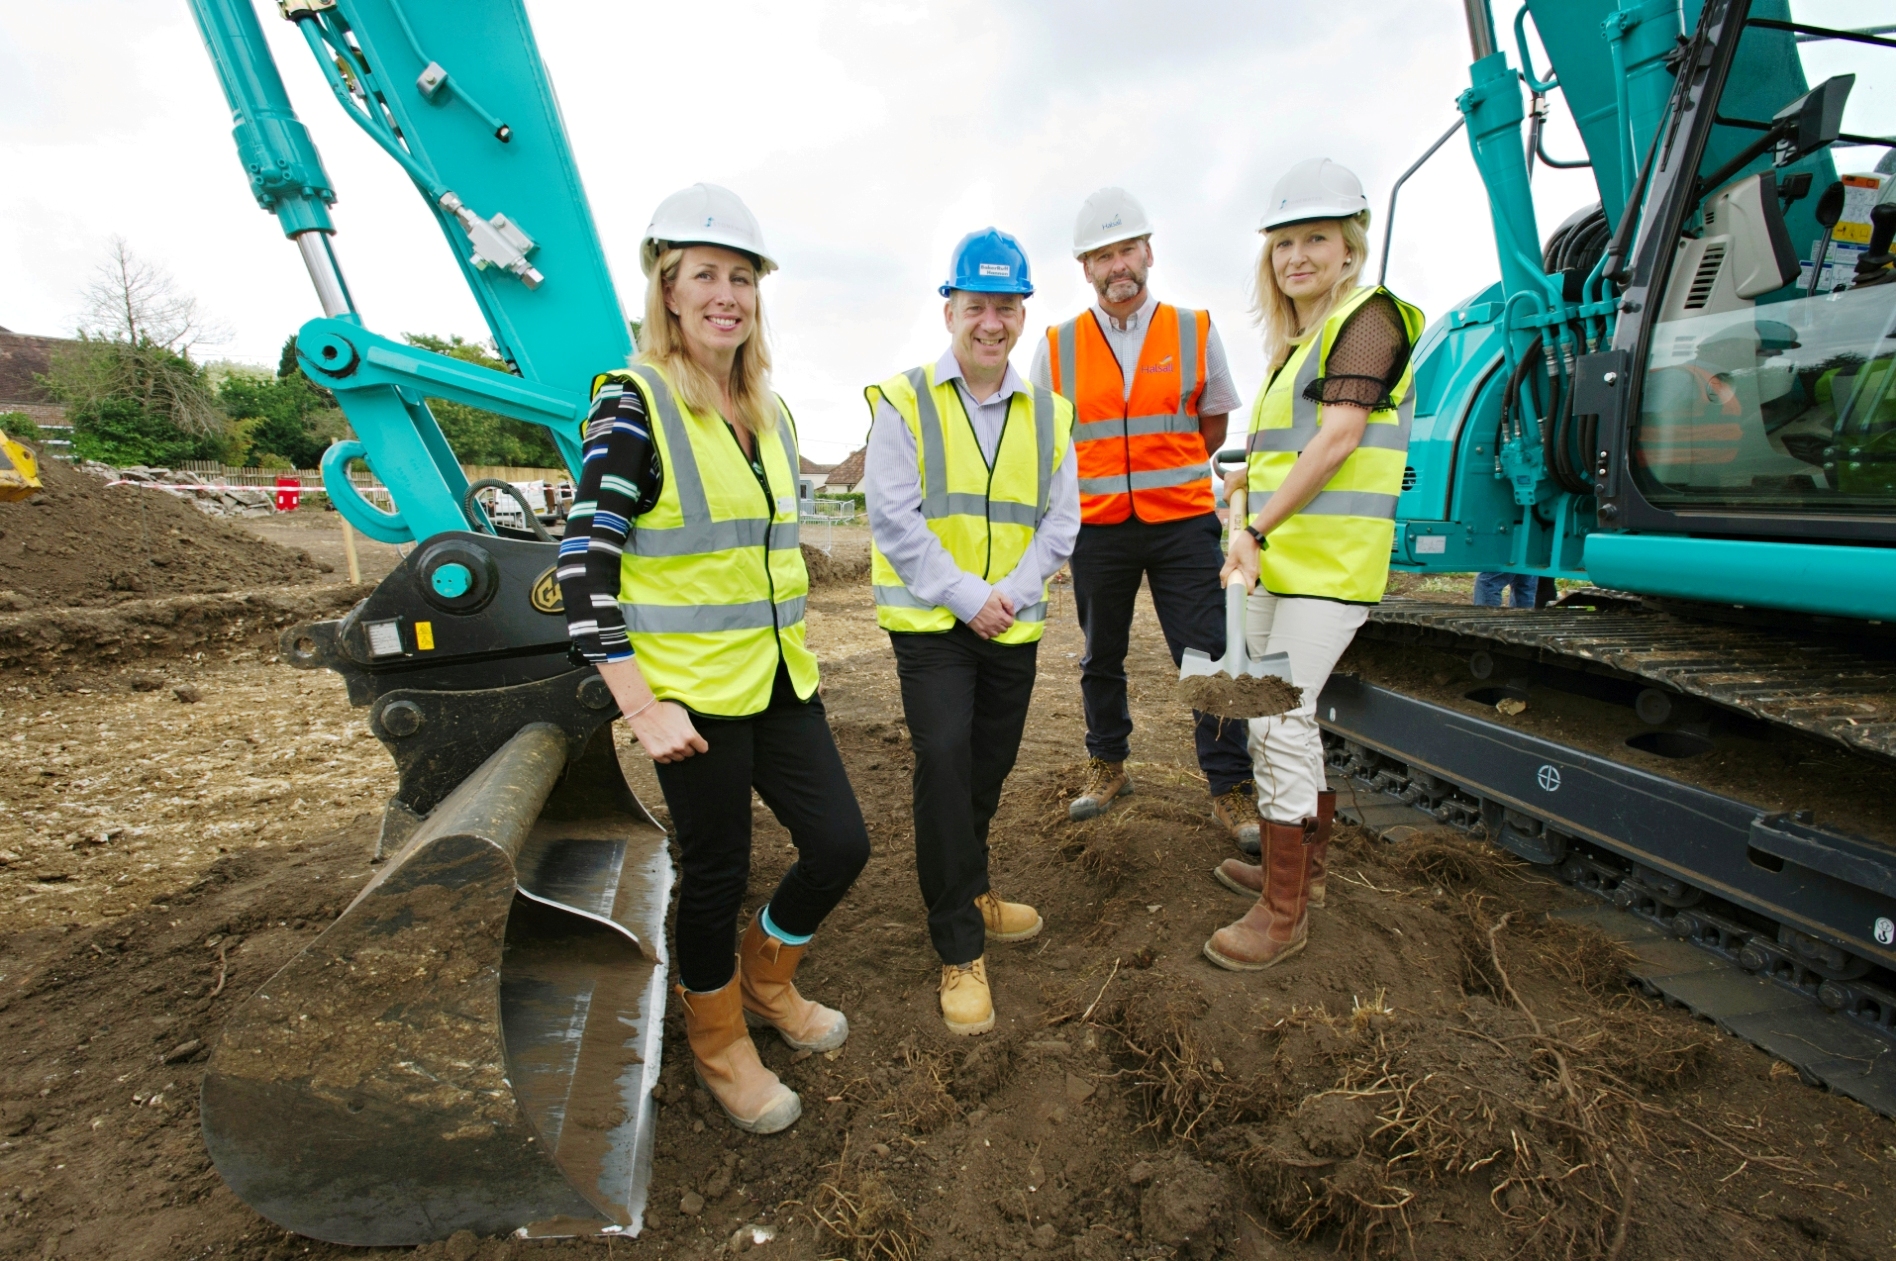 15 new affordable homes in Wincanton